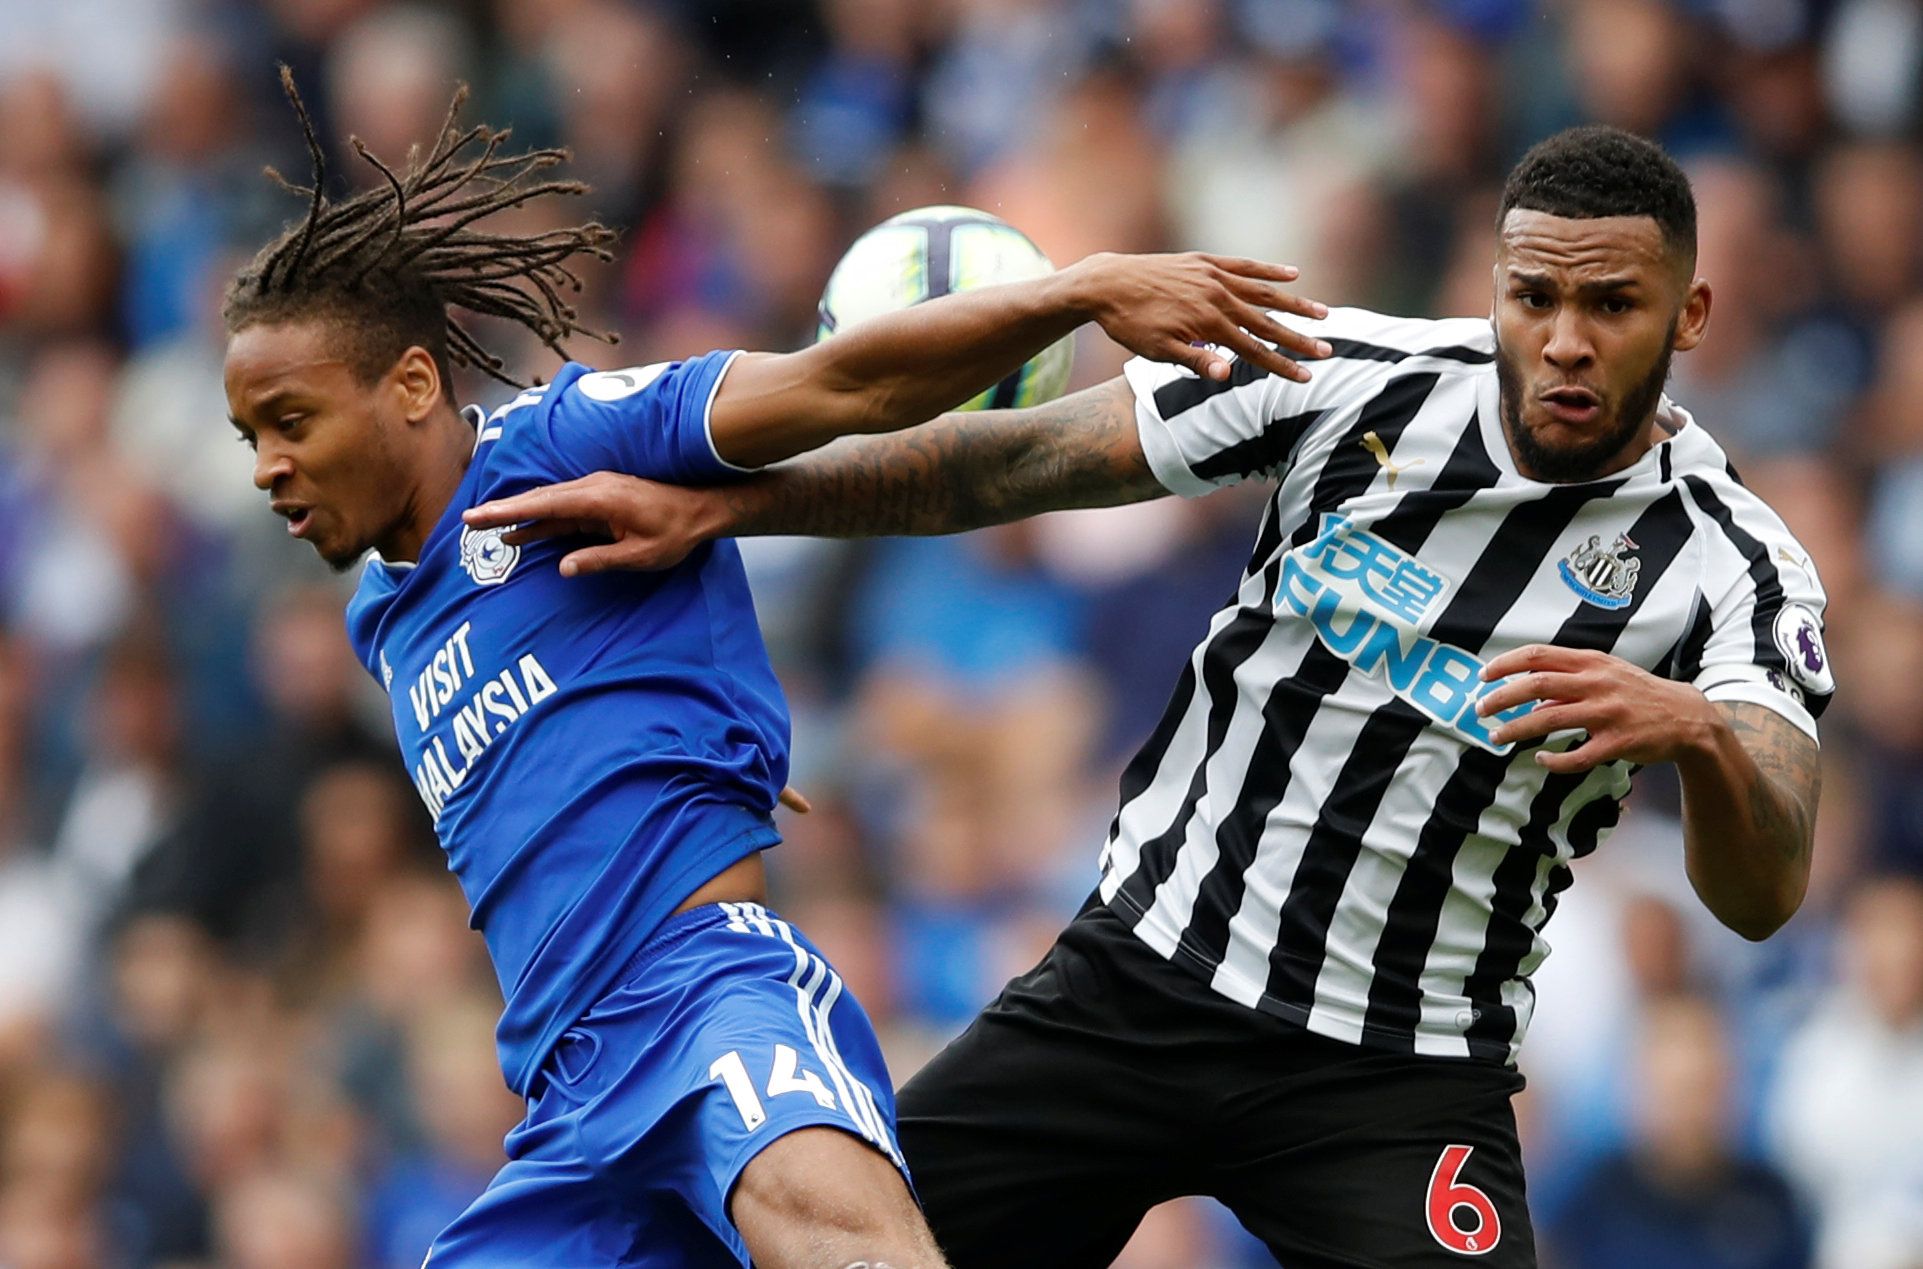 Soccer Football - Premier League - Cardiff City v Newcastle United- Cardiff City Stadium, Cardiff, Britain - August 18, 2018   Cardiff City's Bobby Reid and Newcastle United's Jamaal Lascelles      Action Images via Reuters/Carl Recine    EDITORIAL USE ONLY. No use with unauthorized audio, video, data, fixture lists, club/league logos or "live" services. Online in-match use limited to 75 images, no video emulation. No use in betting, games or single club/league/player publications.  Please conta